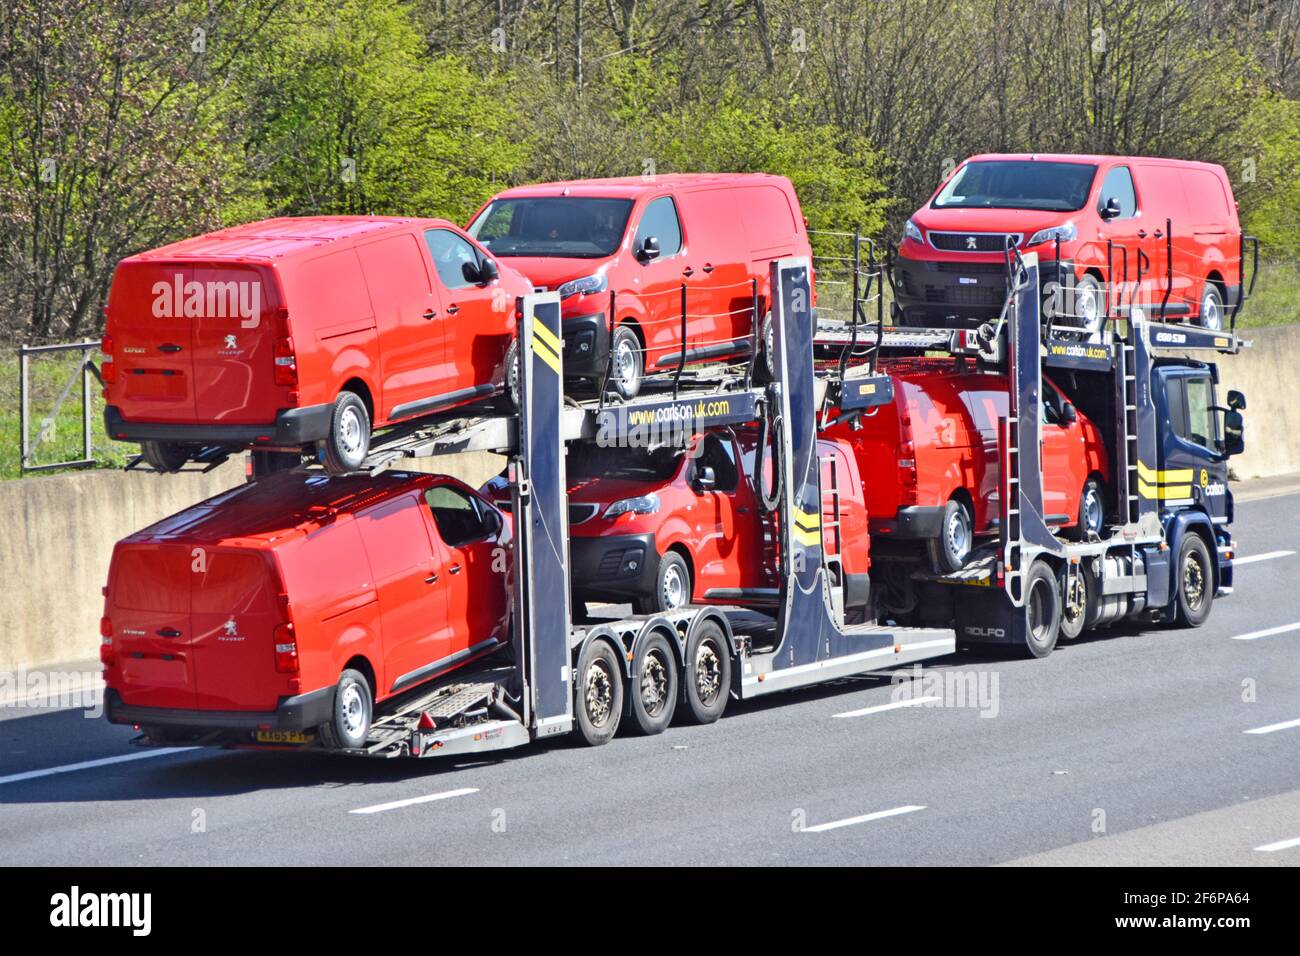 Loaded lorry truck car distribution transporter trailer to transport & deliver six new red Peugeot Expert brand of vans driving on motorway England UK Stock Photo